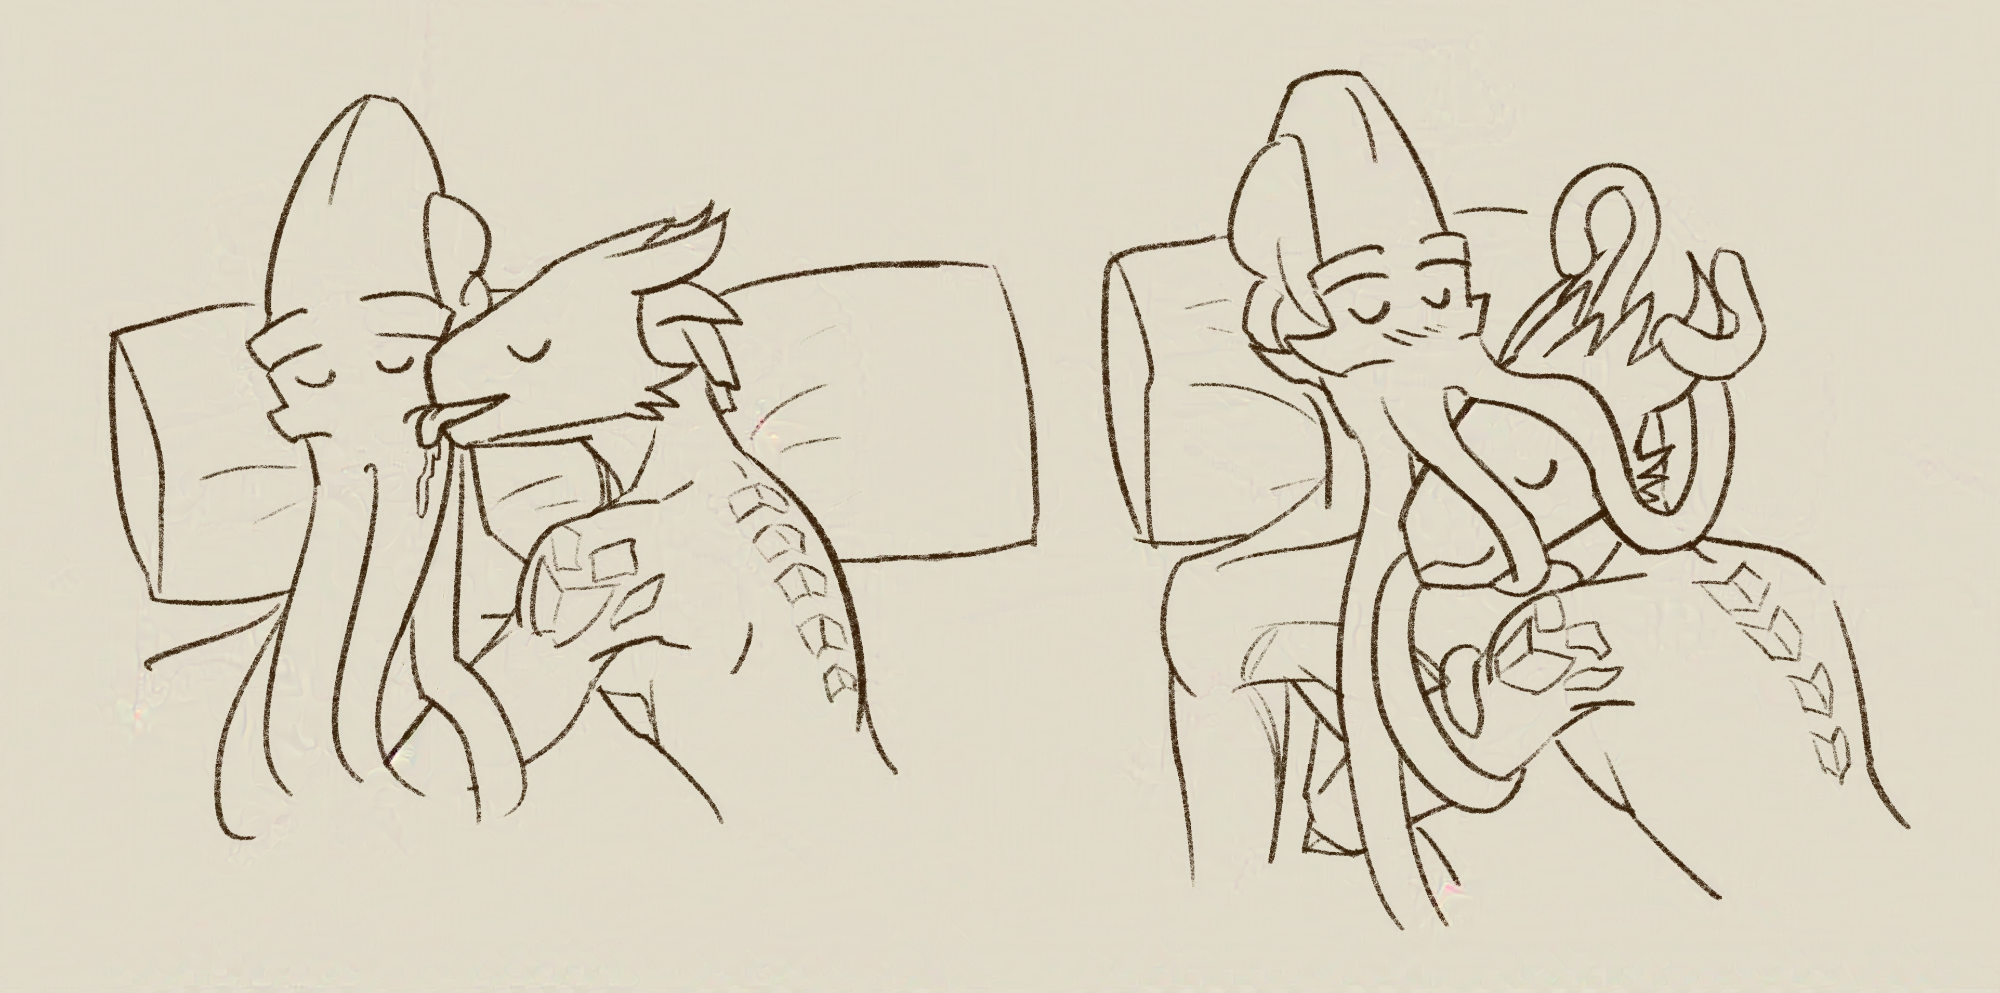 The Emperor (an illithid) and Daamric (a dragonborn) in various sleeping positions. The first sketch has Daamric drooling on the Emperor's cheek. The second sketch has Daamric sleeping on the Emperor's chest, while the Emperor's tentacles are happily wrapping around Daamric's head and horns.